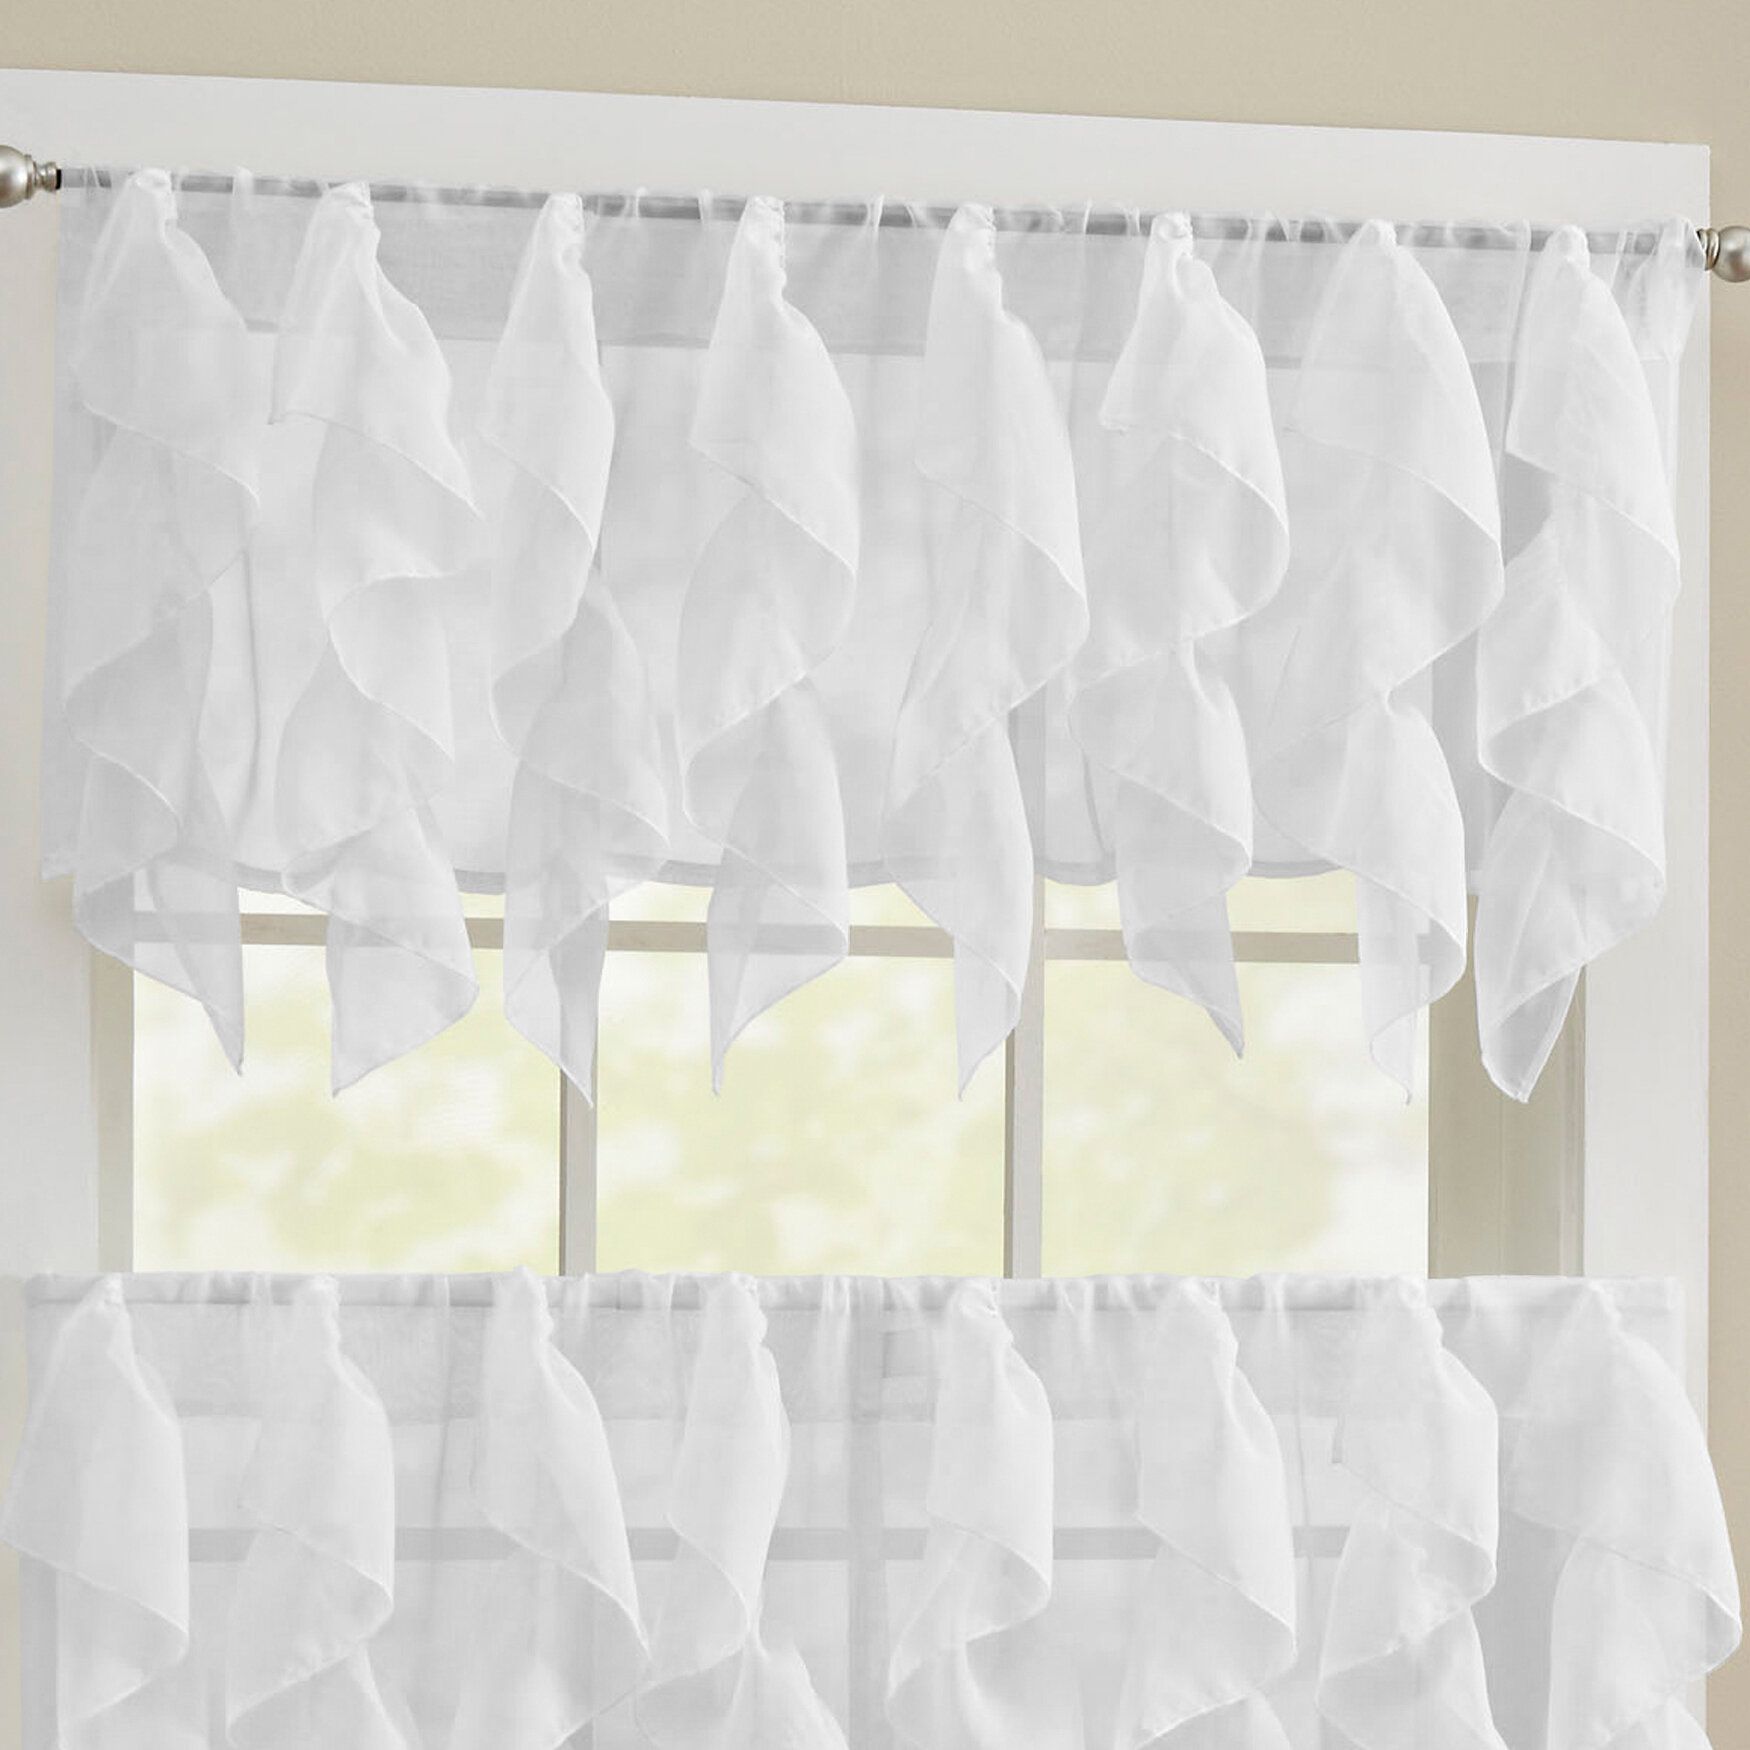 Alonza Window Valance Regarding Navy Vertical Ruffled Waterfall Valance And Curtain Tiers (View 8 of 20)